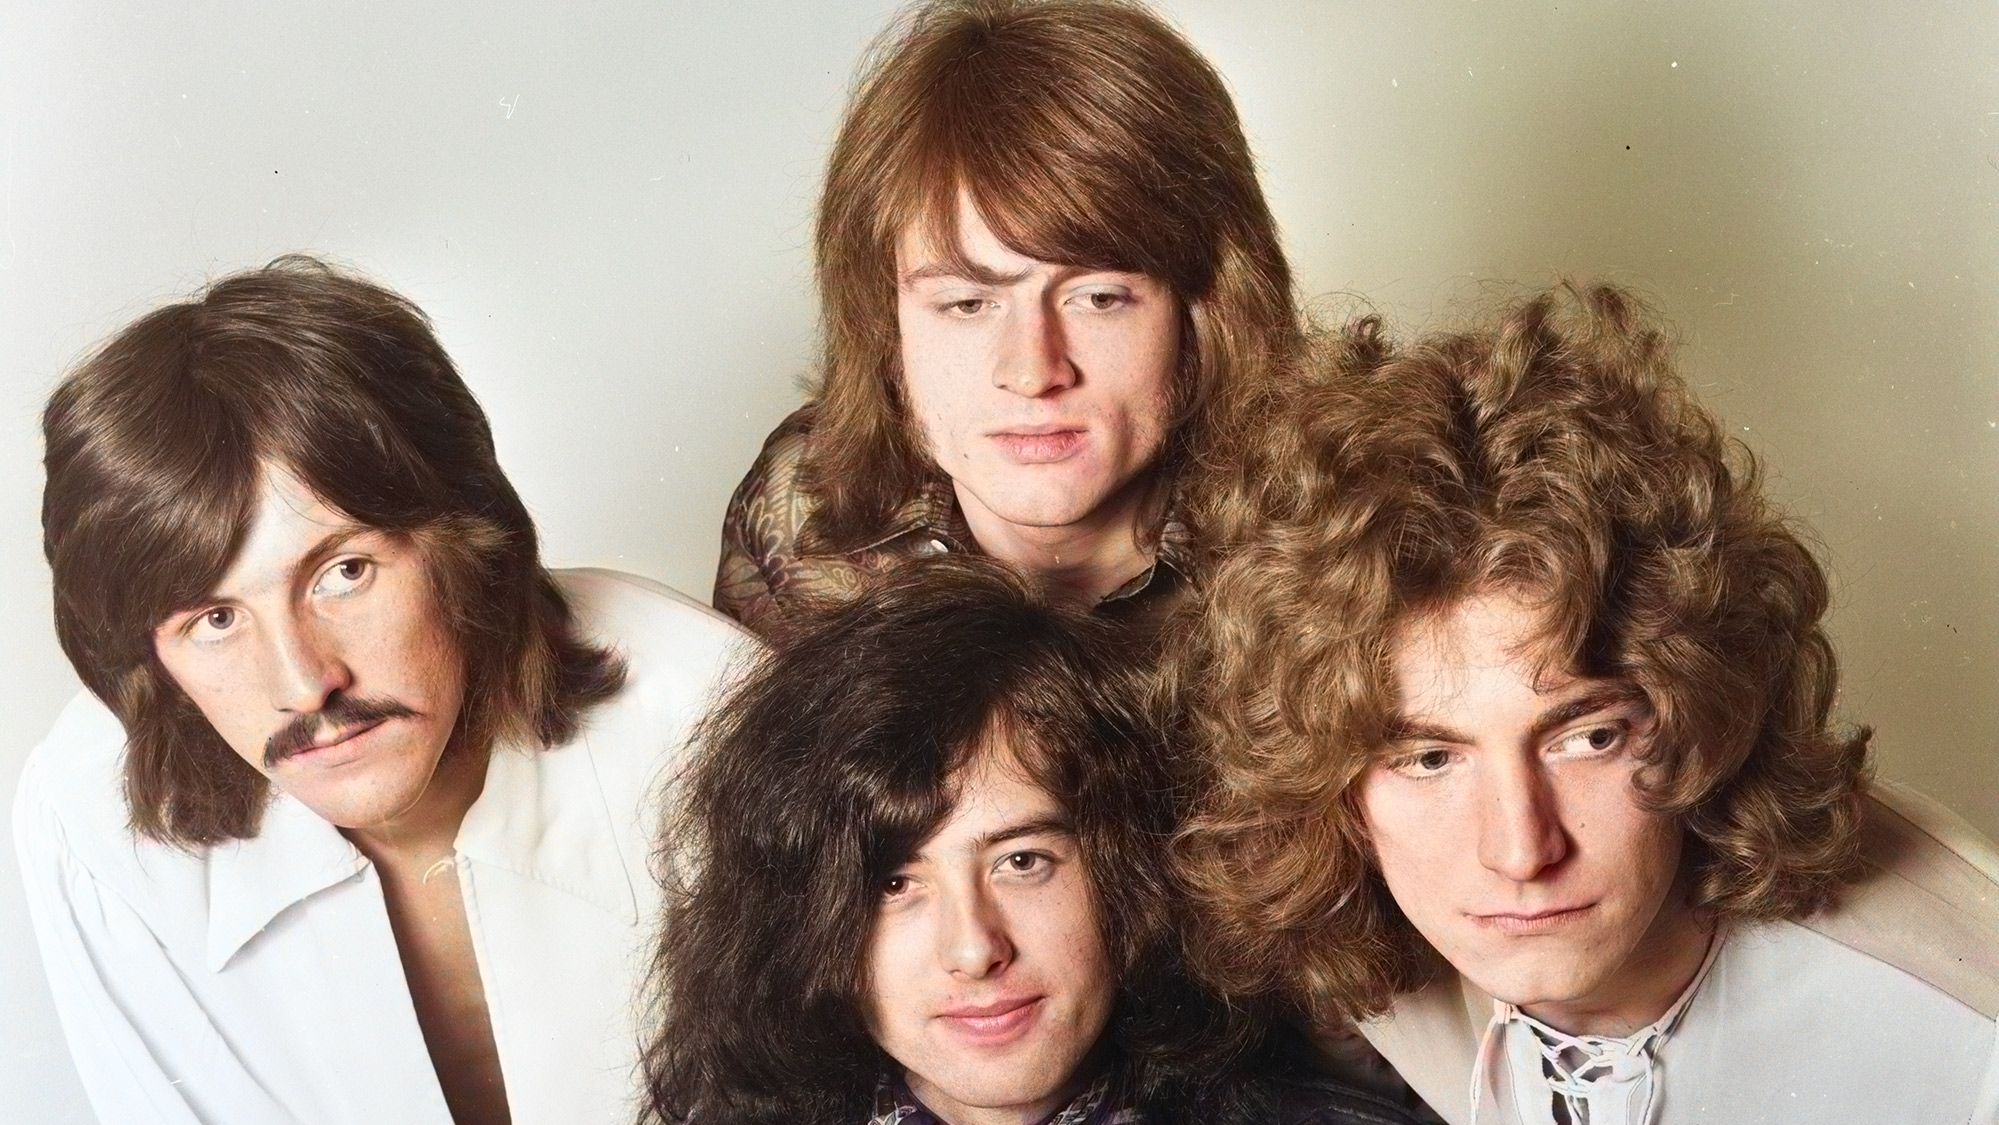  Who Takes the Lead in Led Zeppelin